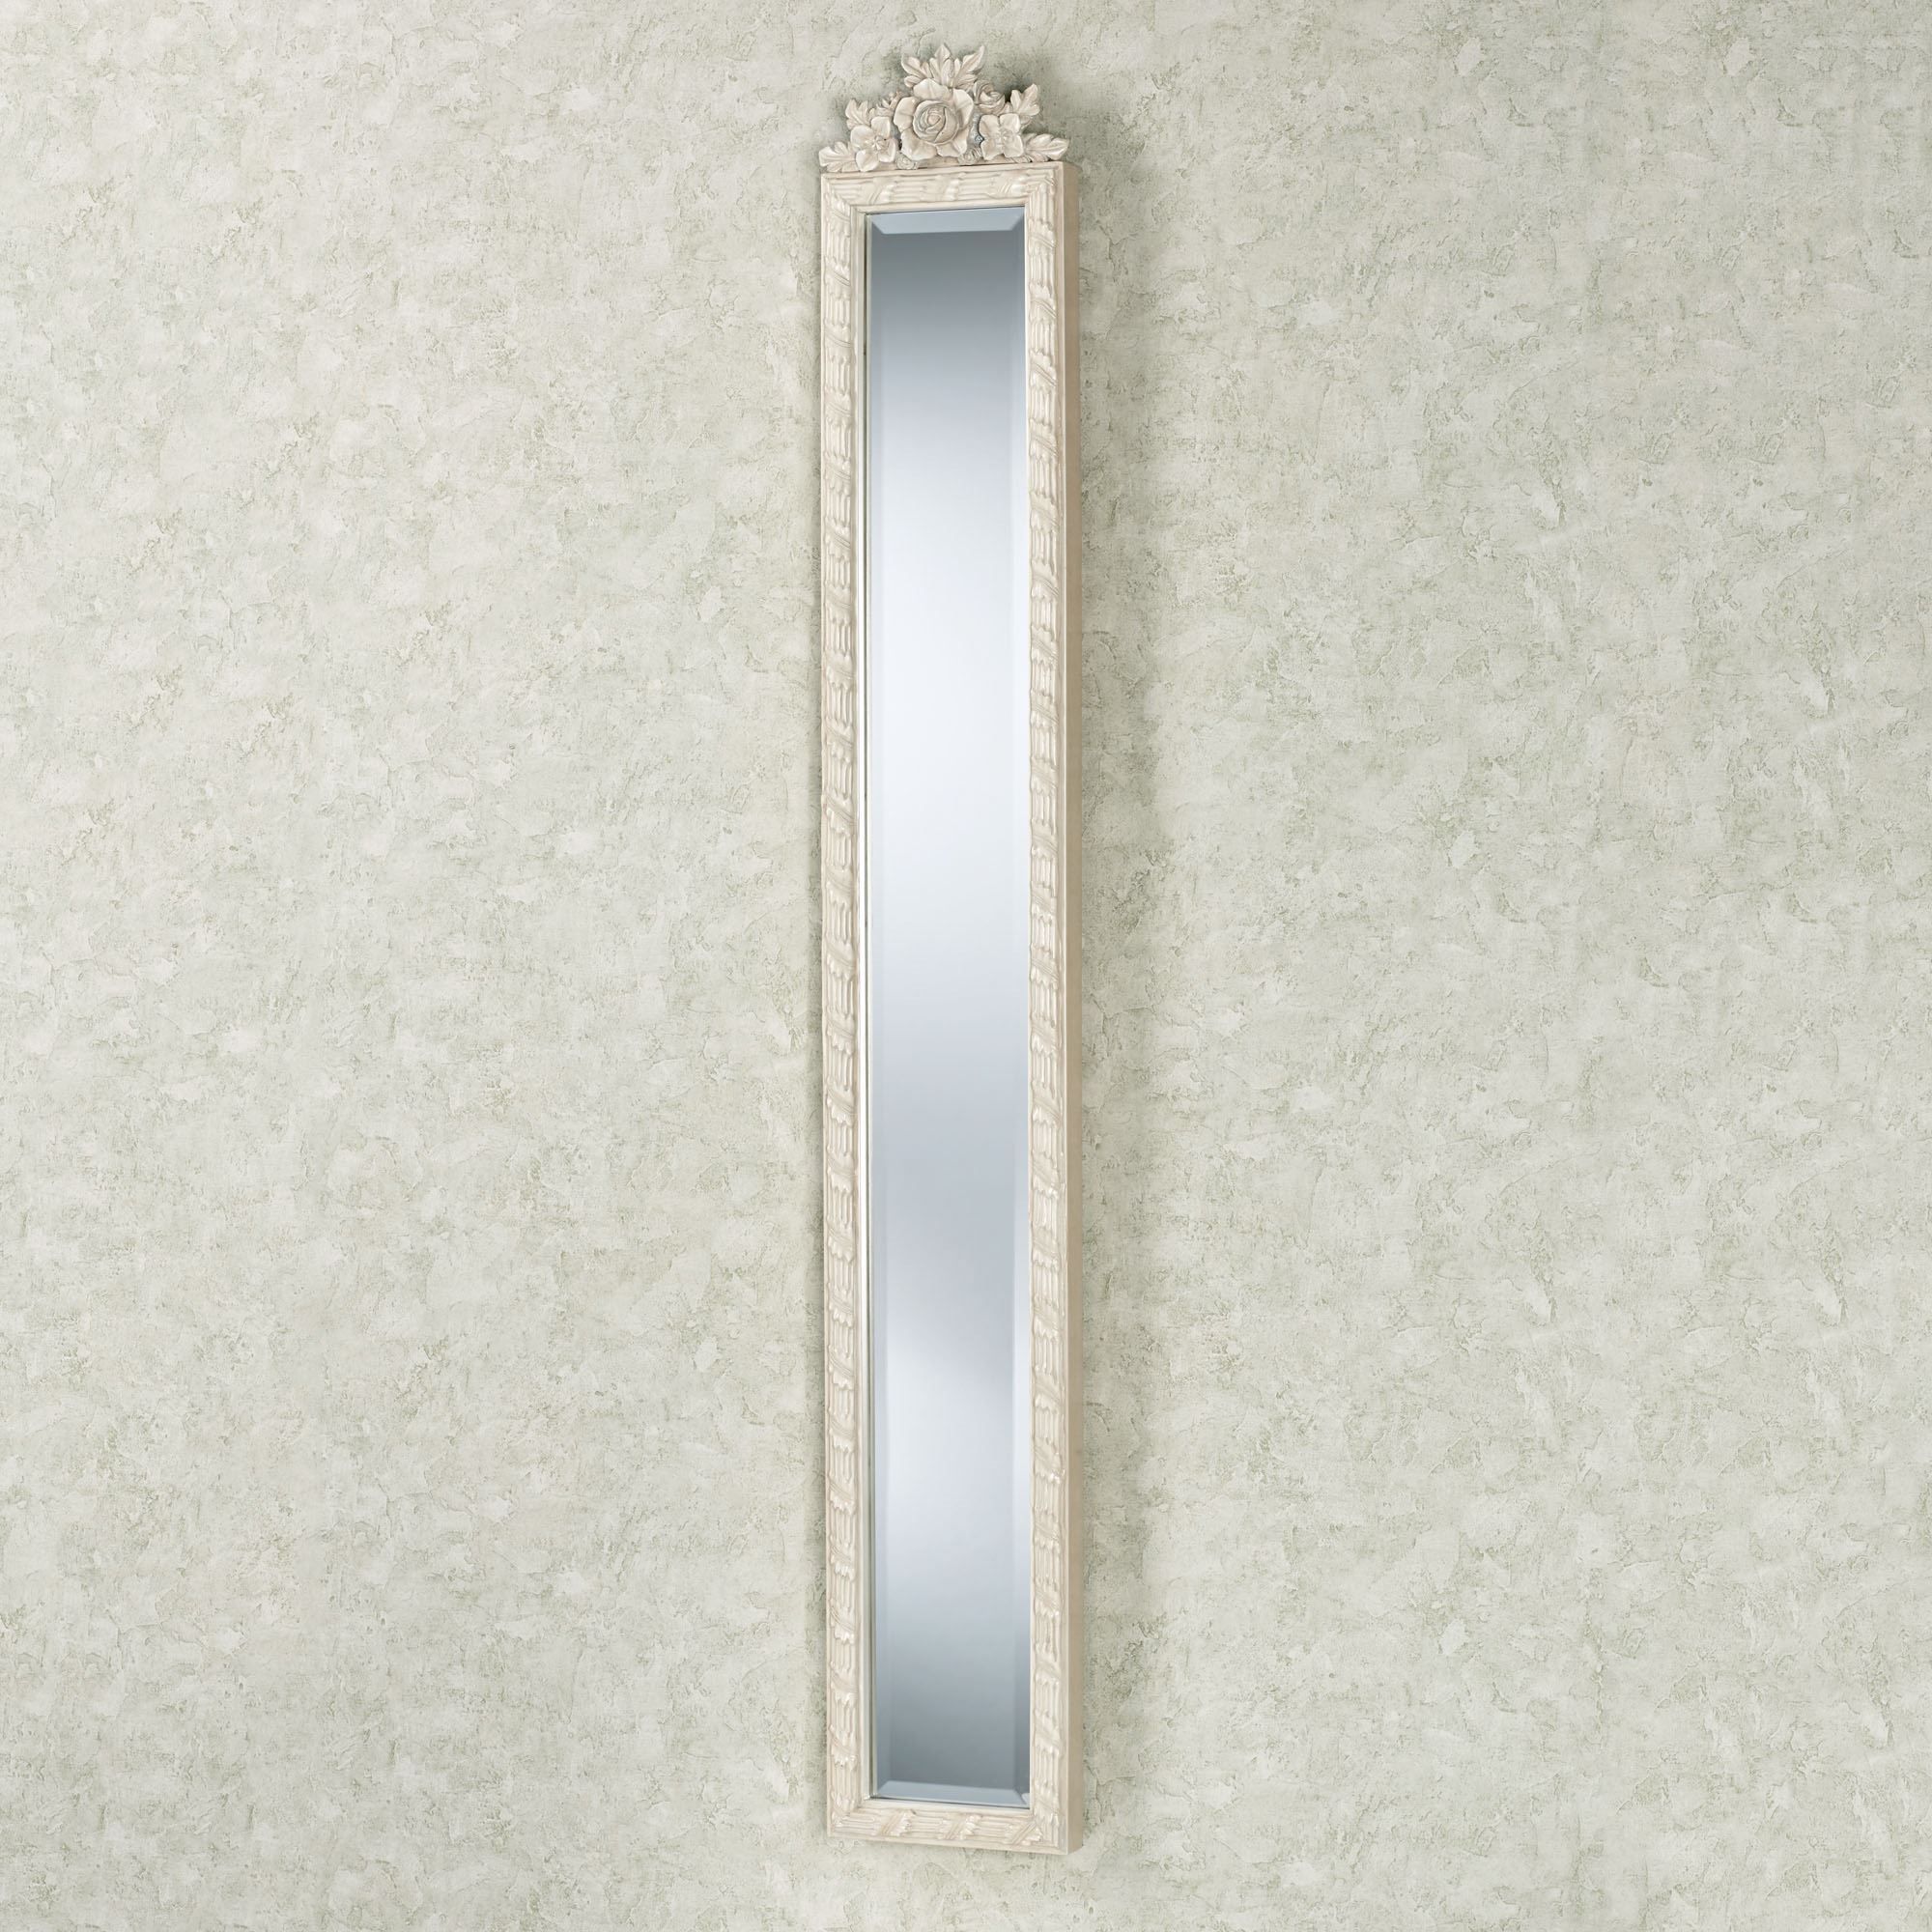 Giuliana Ivory Floral Wall Mirror Panel Throughout Printed Art Glass Wall Mirrors (View 10 of 15)